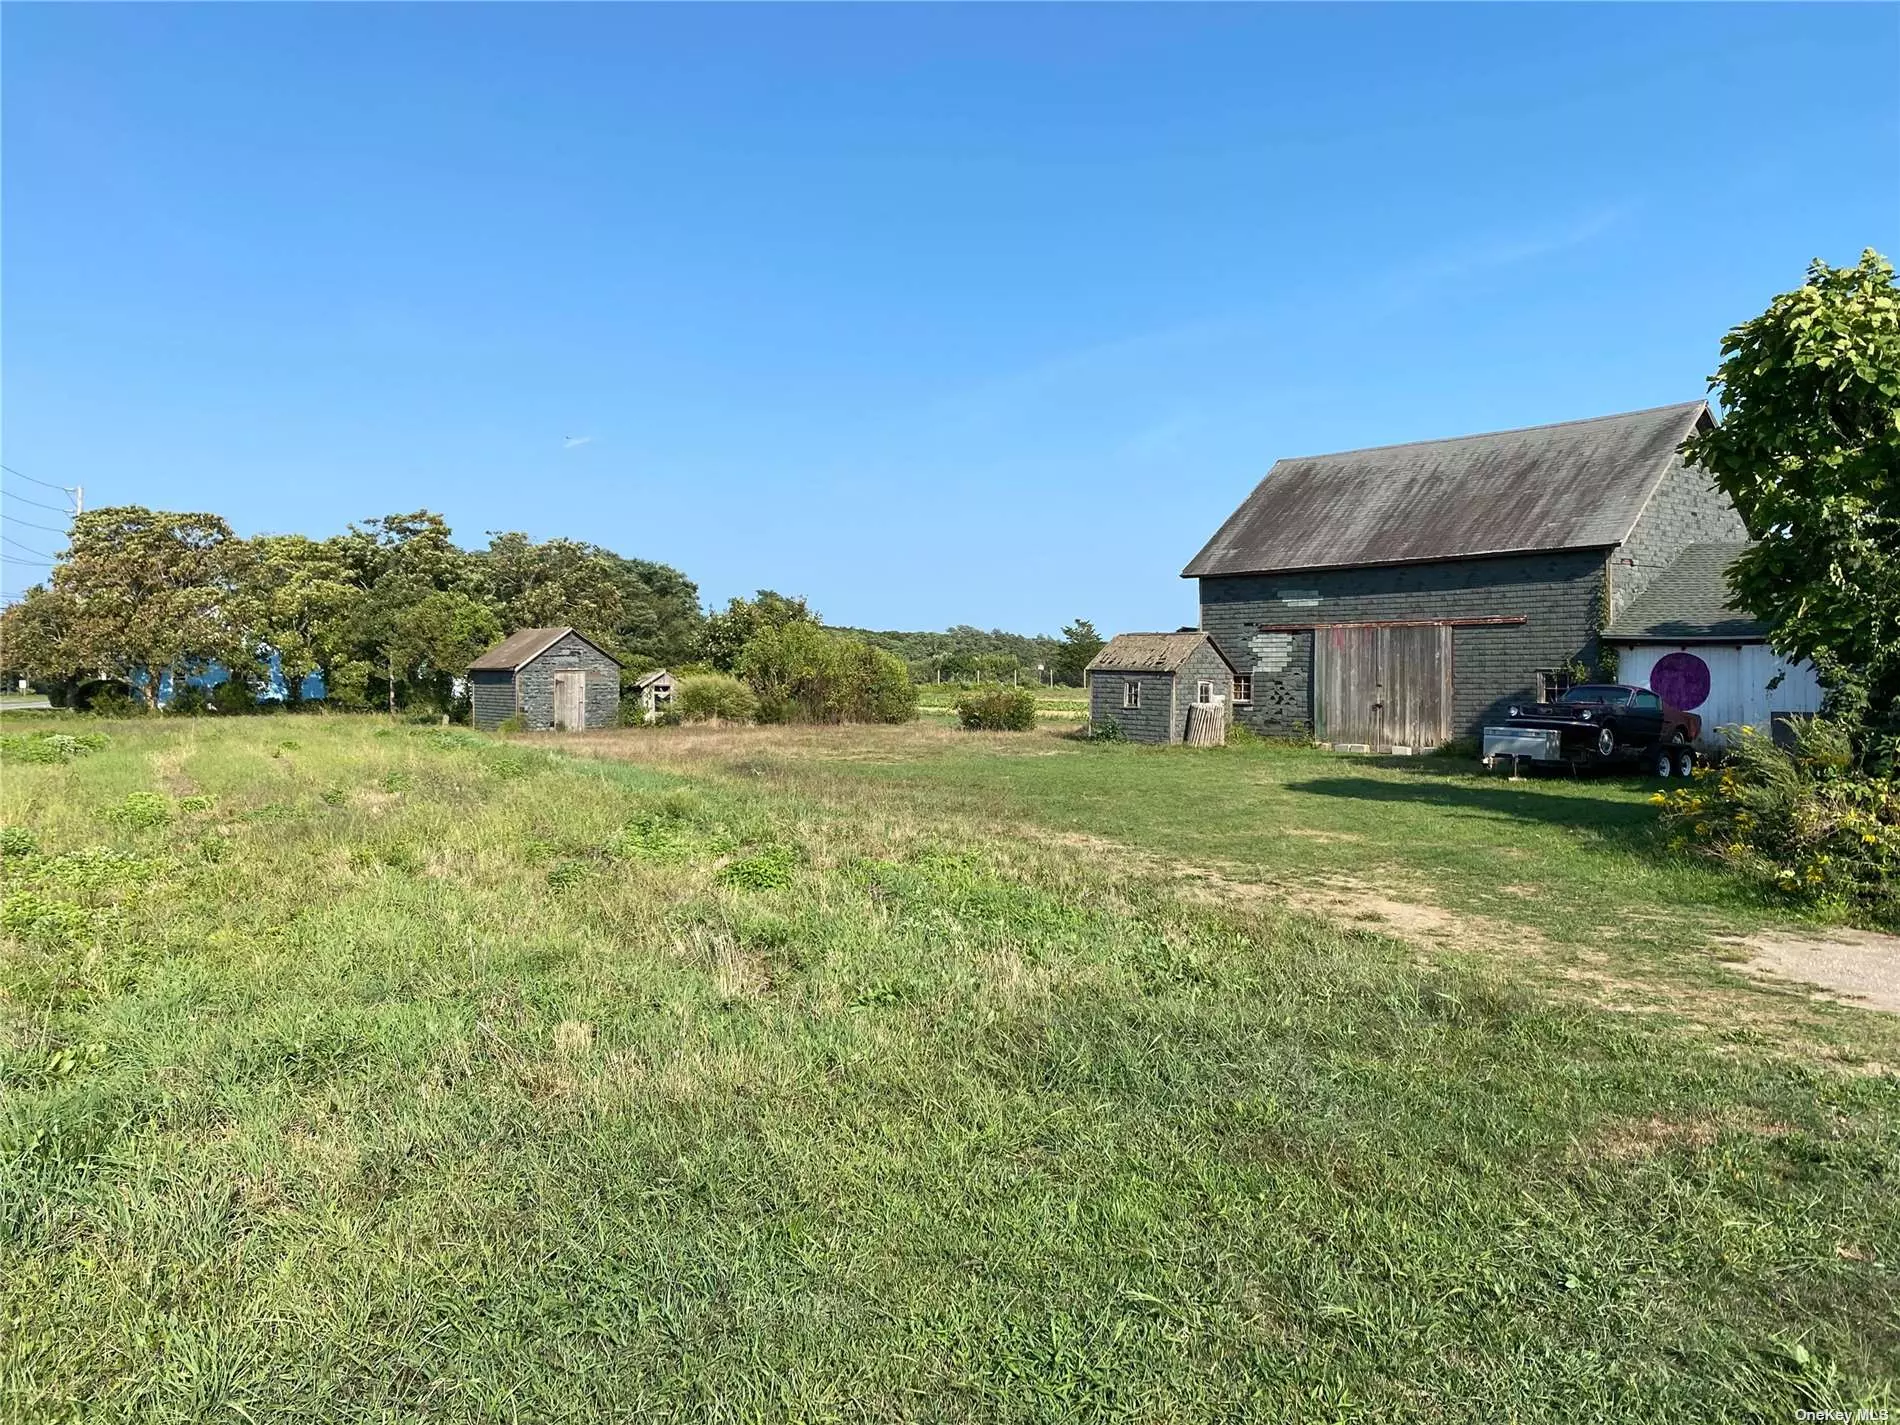 Prime, cleared +3 bucolic acres overlooking farmland and vineyards in the heart of Cutchogue. Plenty of room for a house, pool, and more or ideal for agricultural growing. Pre-CO exists for barns and sheds but all information must be verified independently by the buyer. Zoned A-C (Agricultural-Conservation) Bring your imagination and come build your North Fork dream home! Please do not enter the property without an appointment as it is being actively farmed.